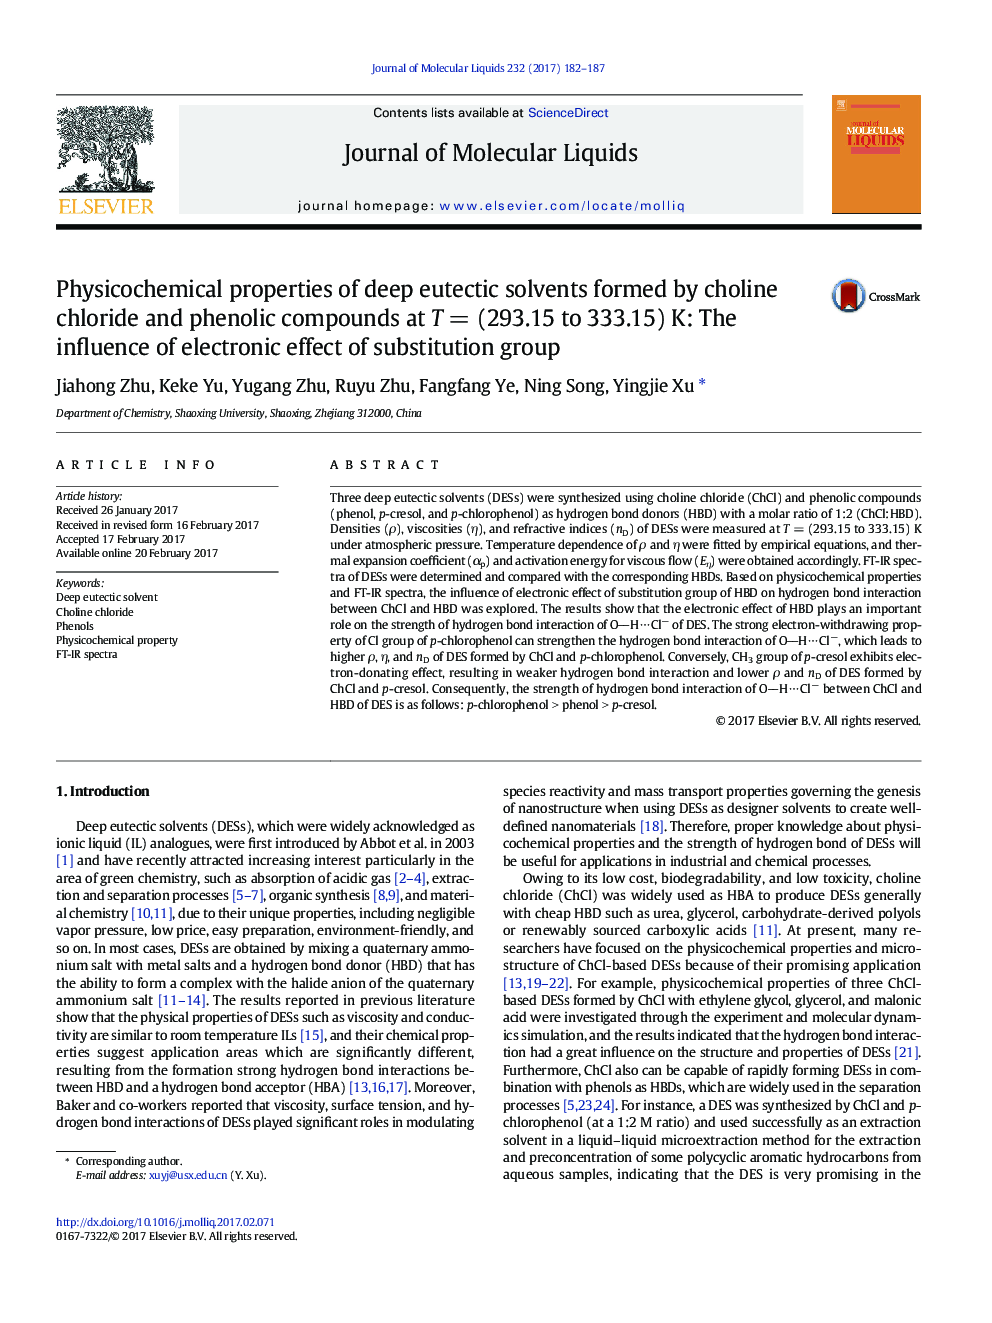 Physicochemical properties of deep eutectic solvents formed by choline chloride and phenolic compounds at TÂ =Â (293.15 to 333.15)Â K: The influence of electronic effect of substitution group